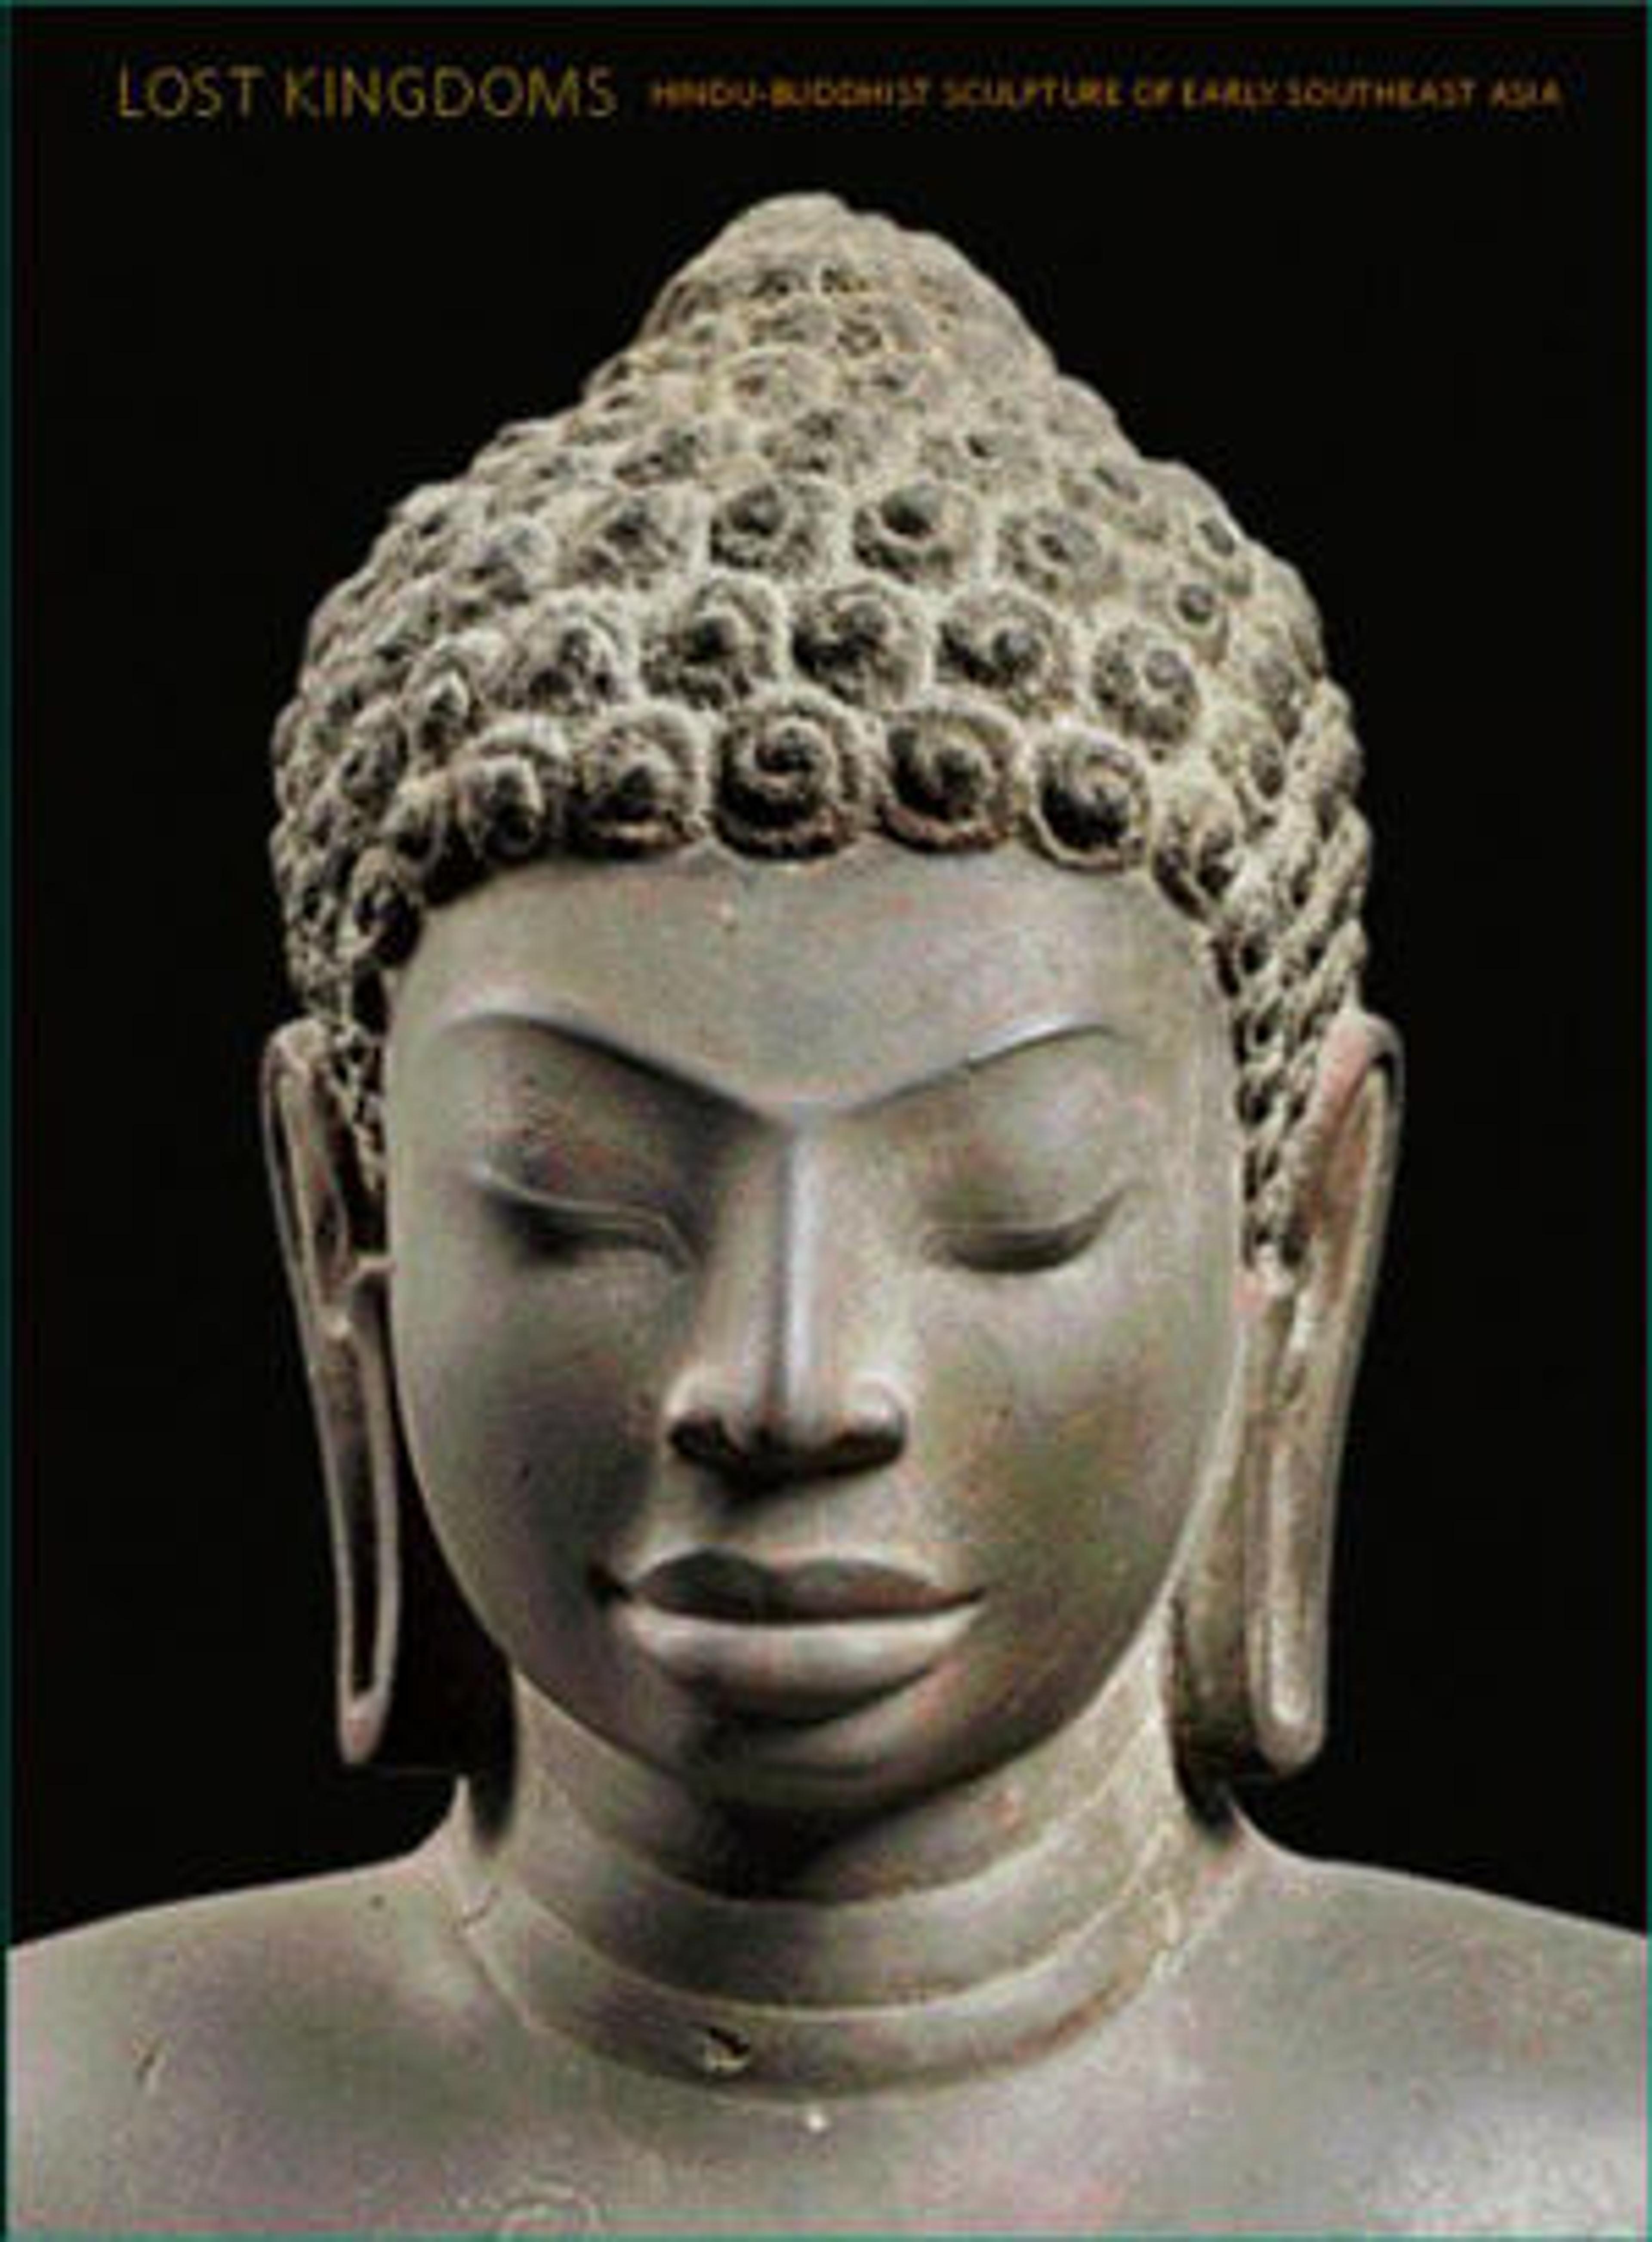 Lost Kingdoms: Hindu-Buddhist Sculpture of Early Southeast Asia by John Guy